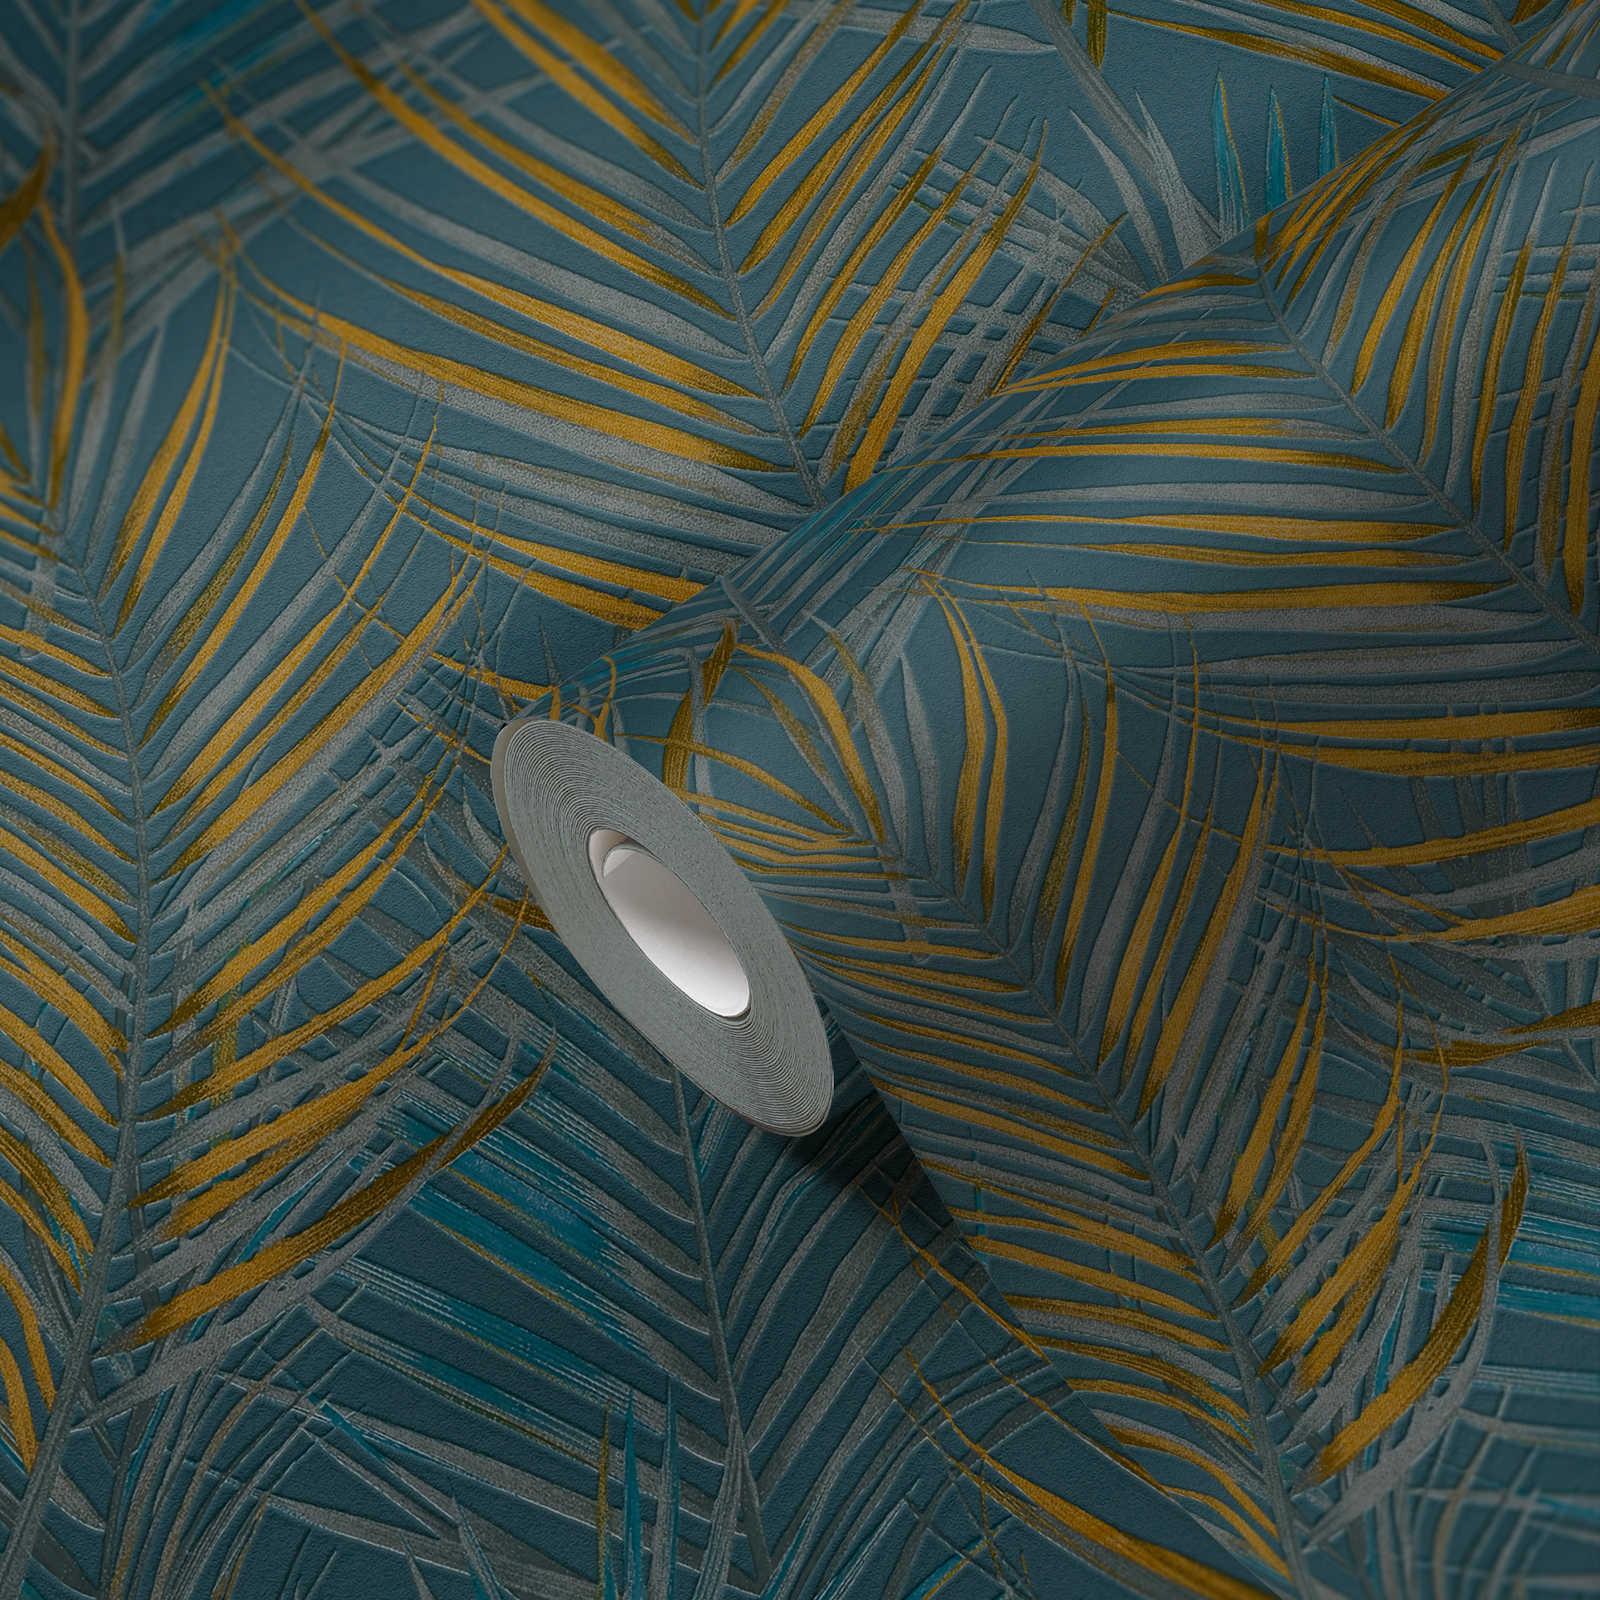             wallpaper jungle pattern with palm leaves - blue, yellow, petrol
        